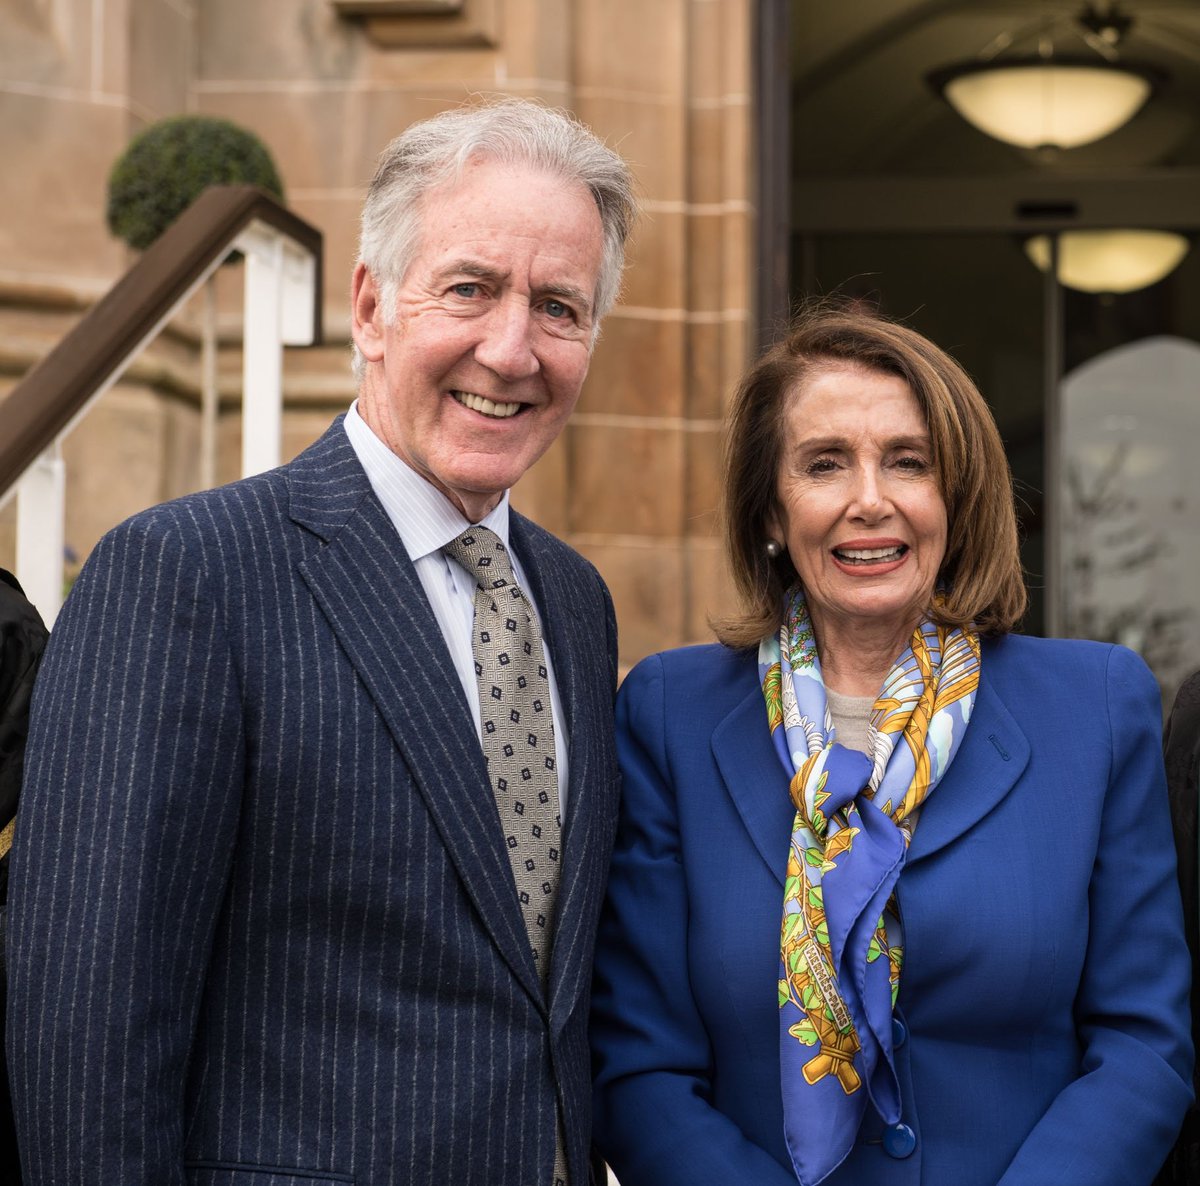 She is America's Speaker. Congratulations to my dear friend and colleague @SpeakerPelosi on receiving the Presidential Medal of Freedom. A well-deserved honor for someone who has broken down barriers and exemplifies what it means to be a public servant.